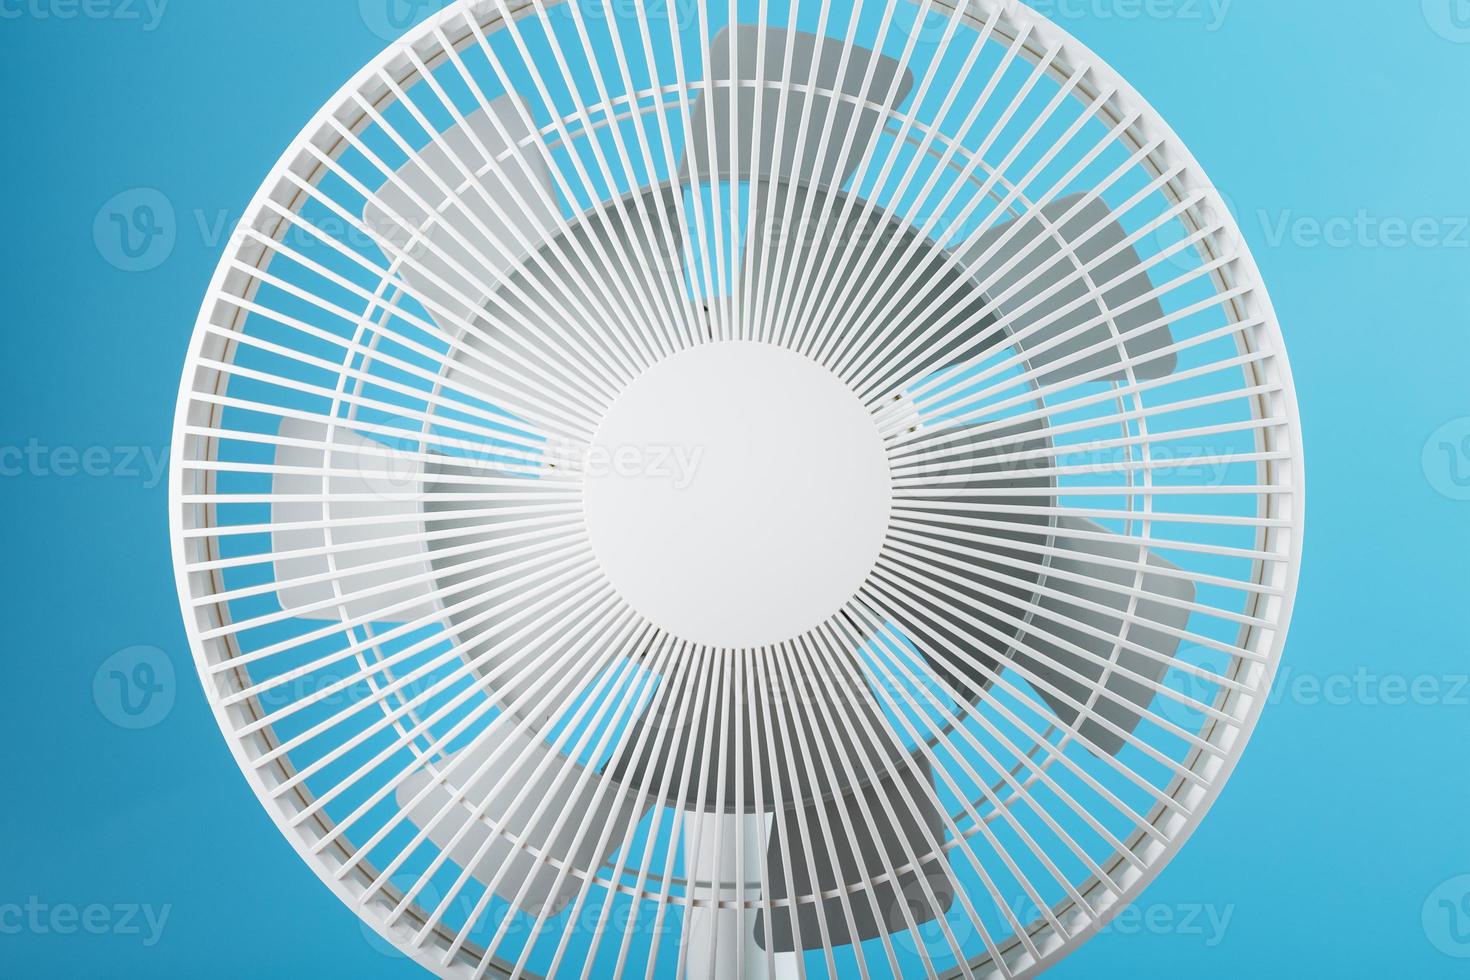 Electric fan in white with a modern design for cooling the room on a blue background photo